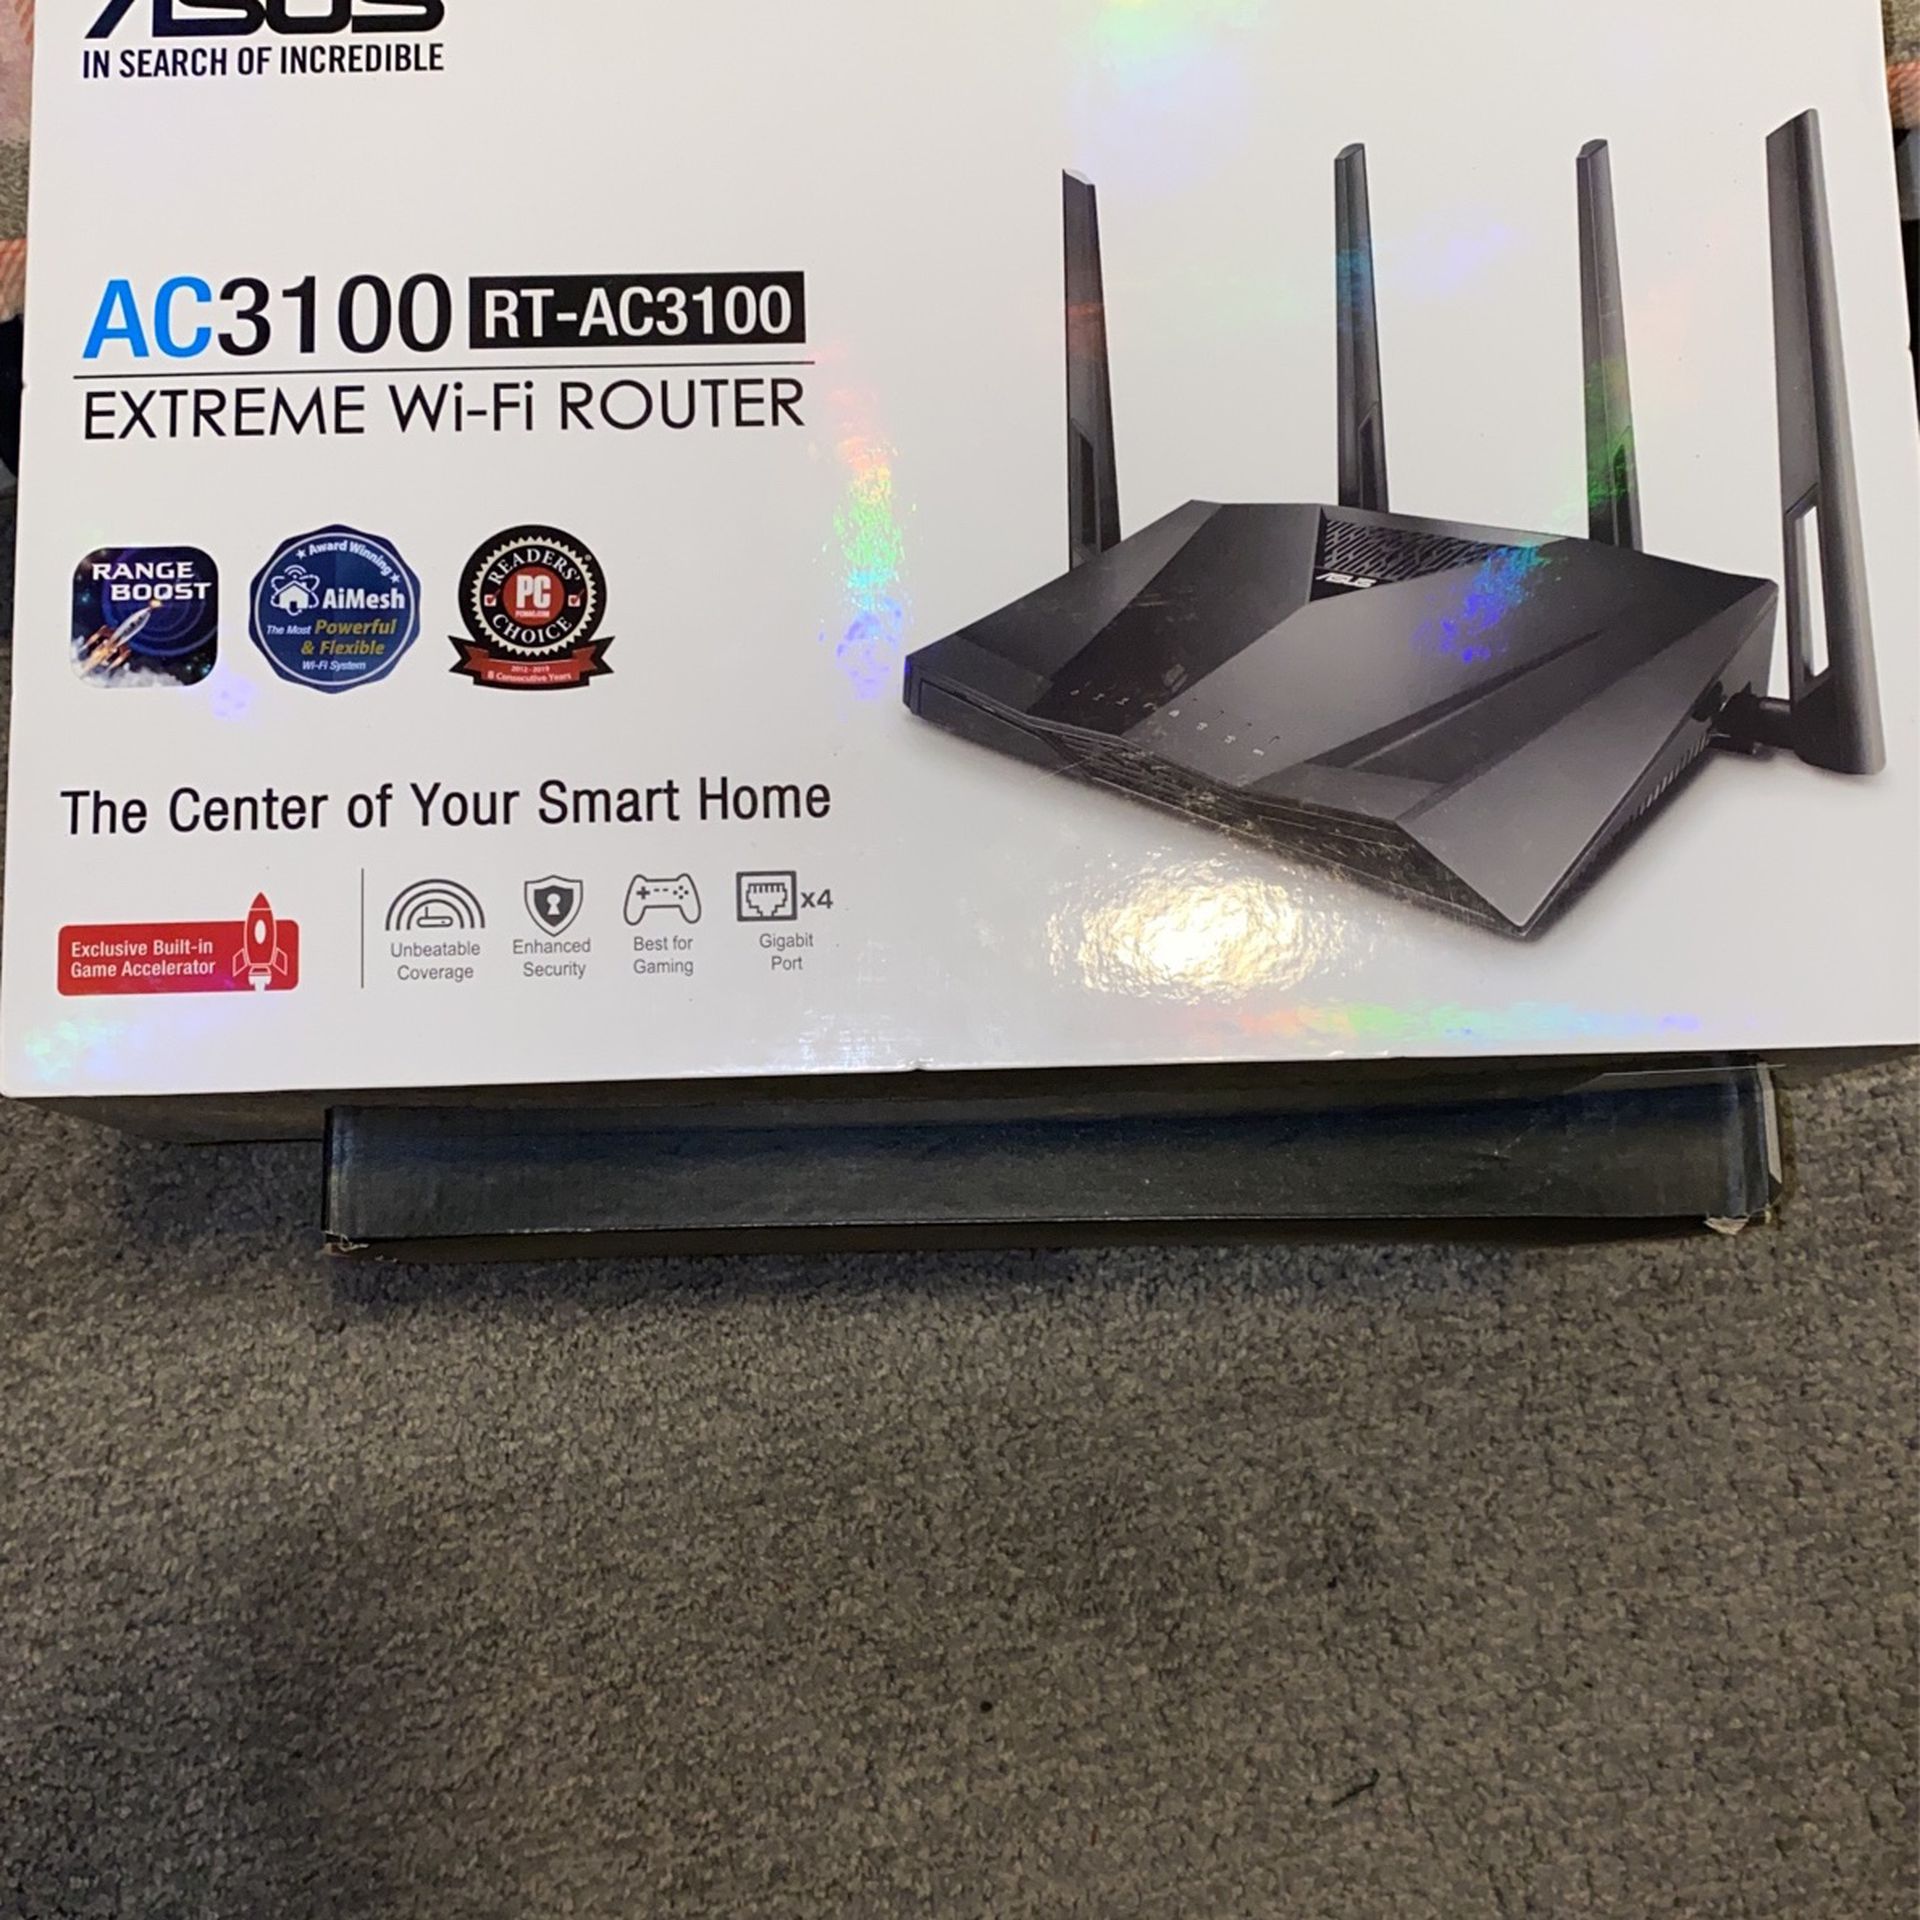 Asus AC3100 Extreme WiFi Router